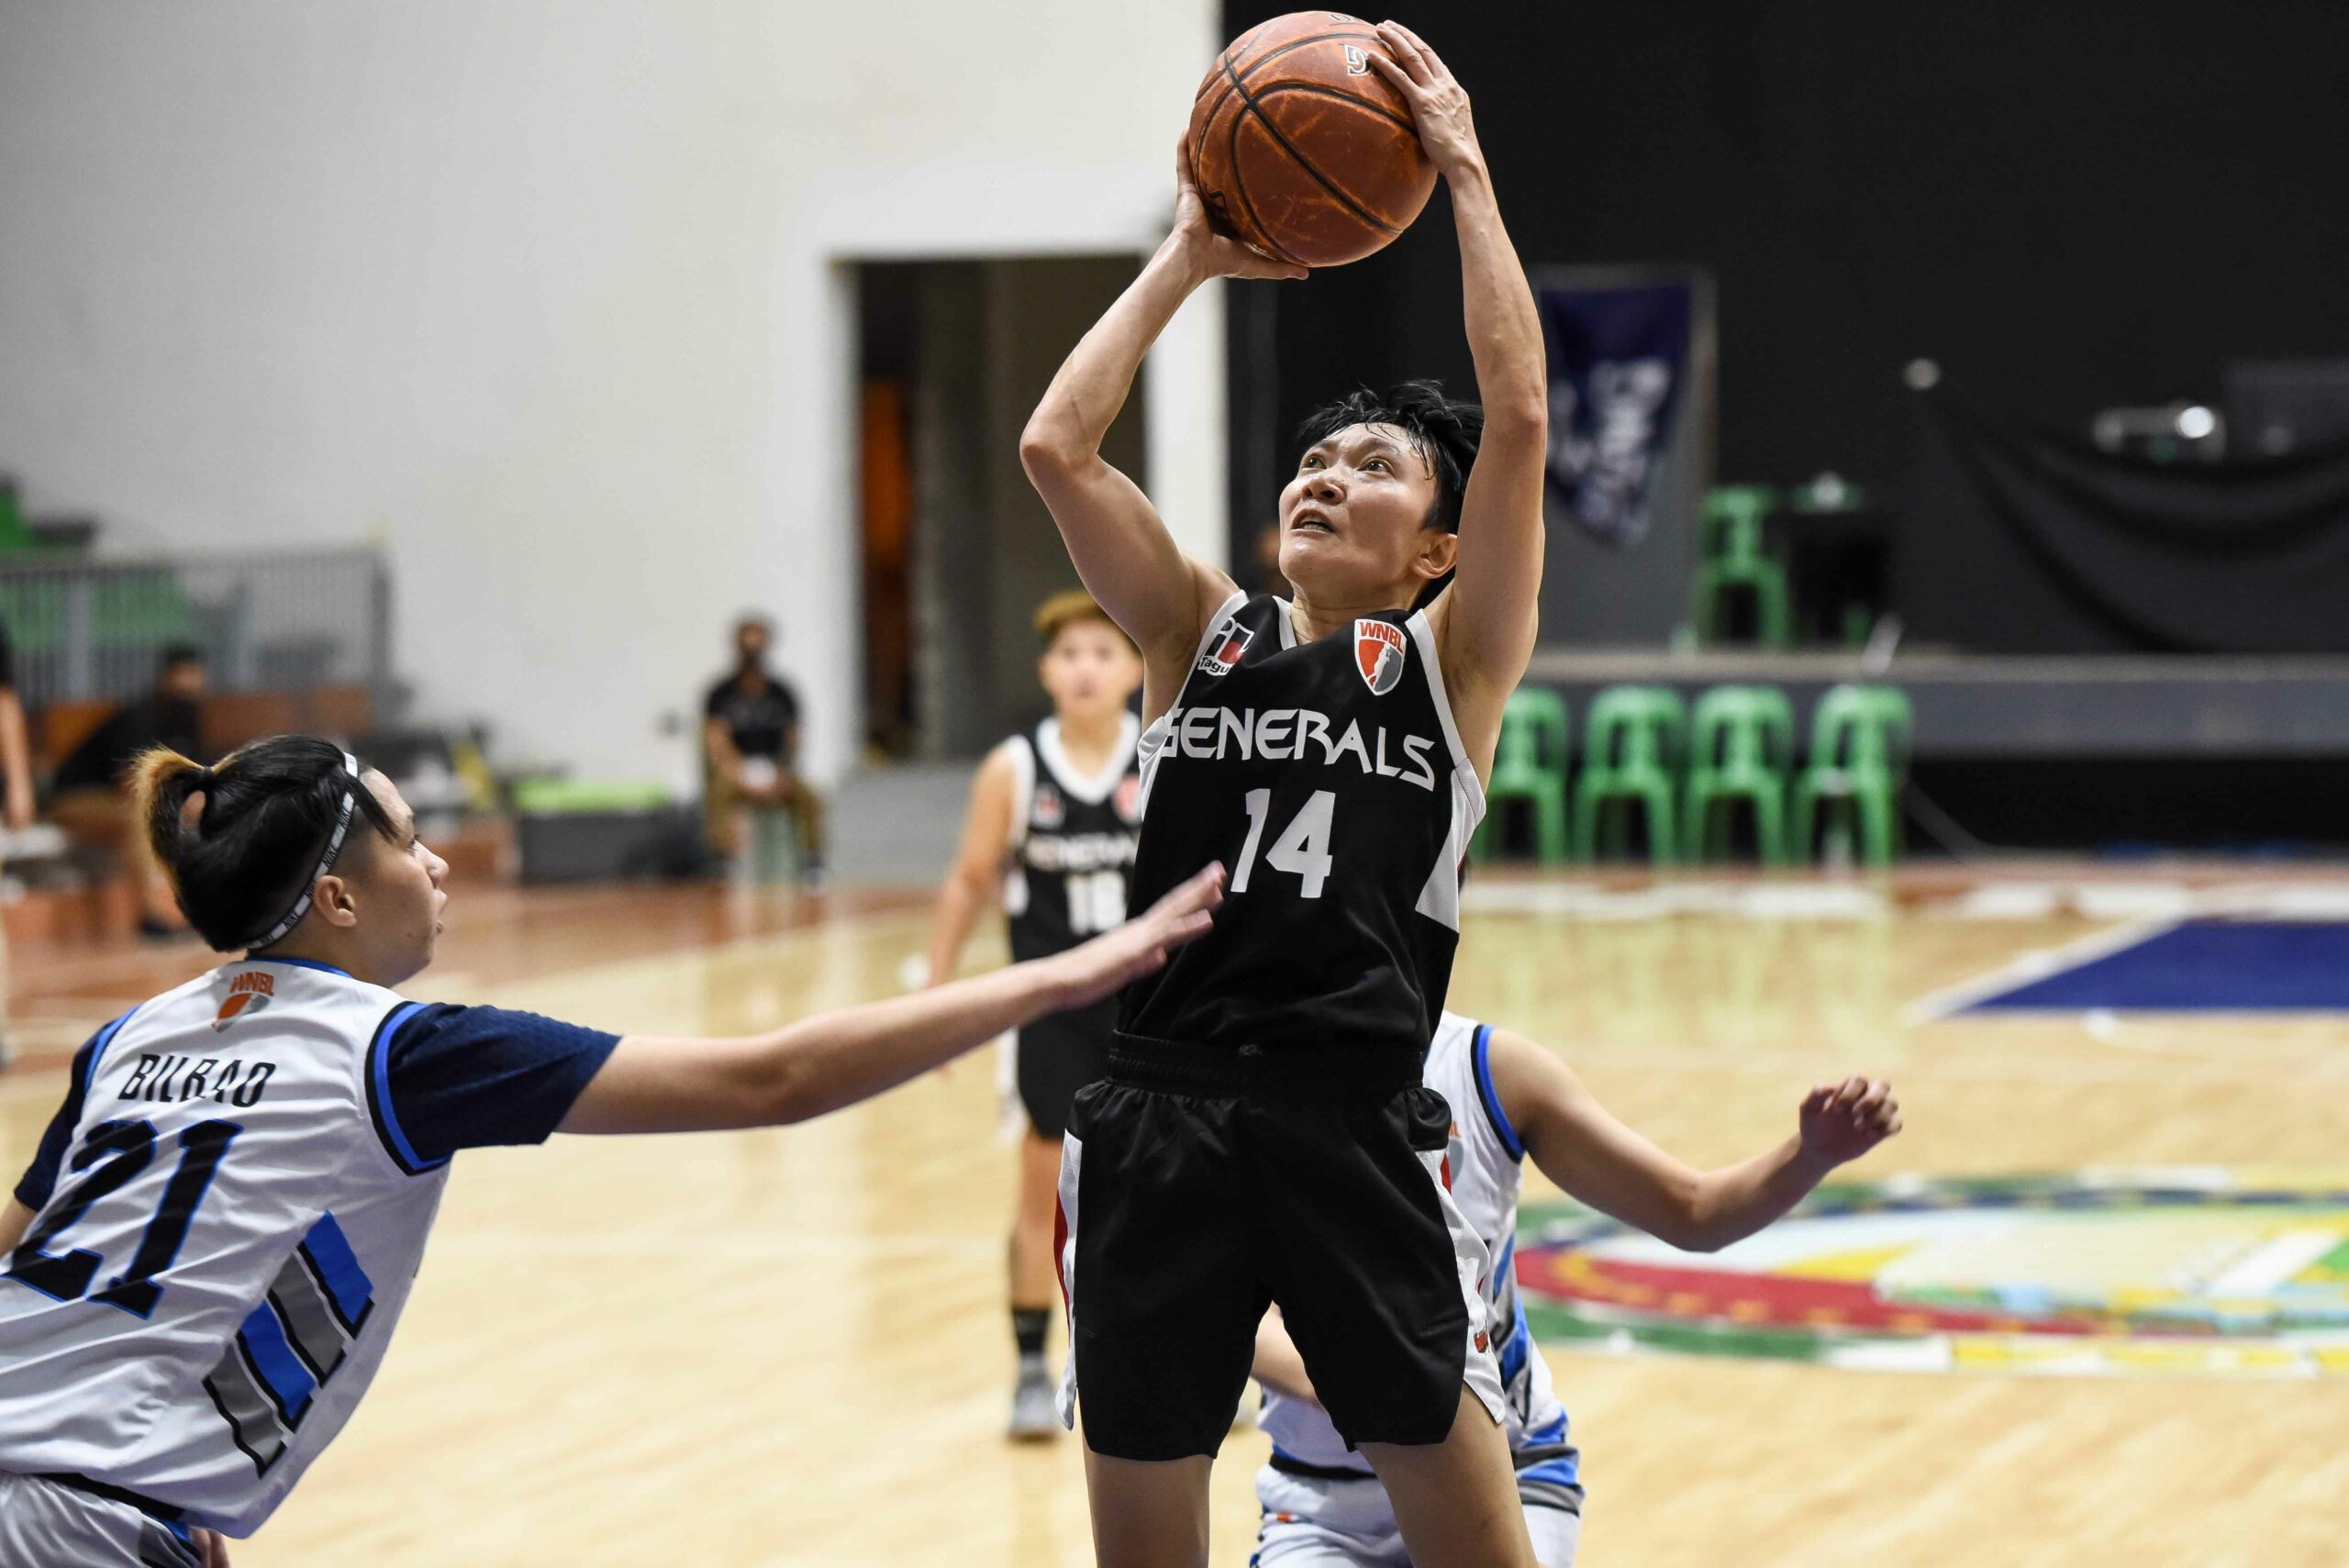 2021-Pia-WNBL-Pacific-Water-vs-Taguig-Marichu-Bacaro-Lady-Generals-scaled Taguig survives war vs Pacific Water, nabs third win in WNBL Basketball NBL News  - philippine sports news